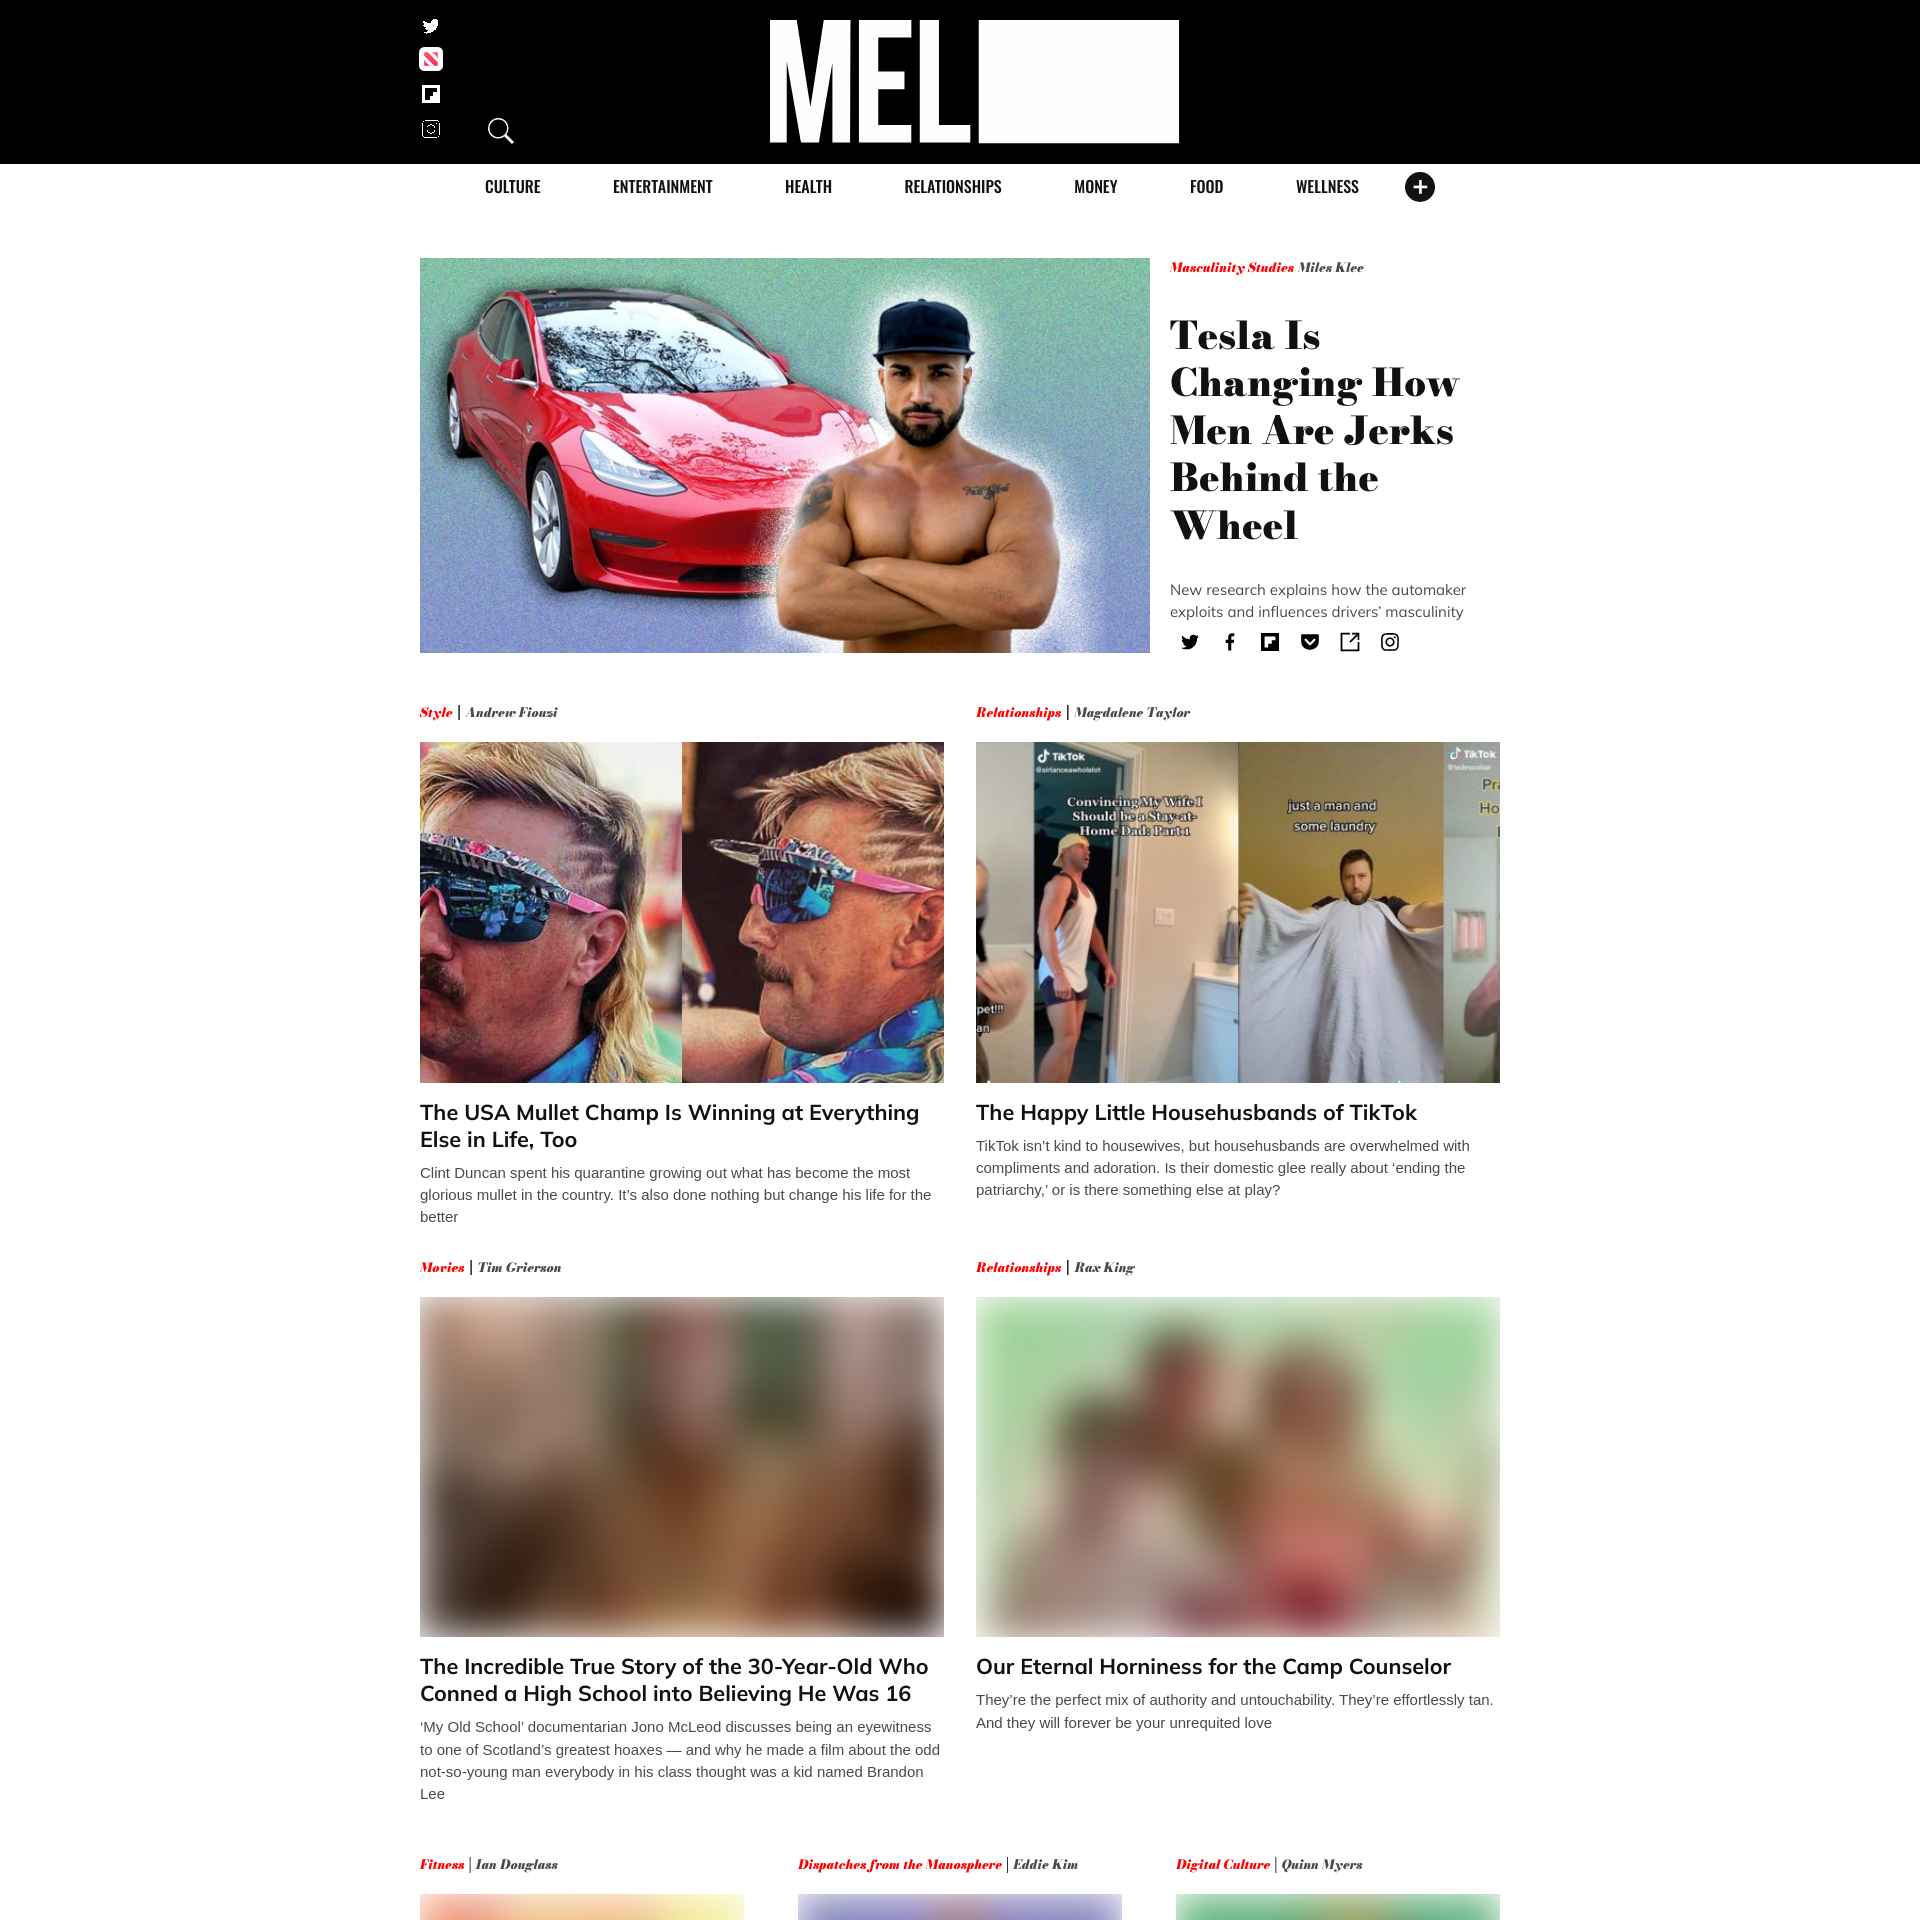 MEL Magazine: A Fusion of Entertainment and Thought-Provoking Journalism